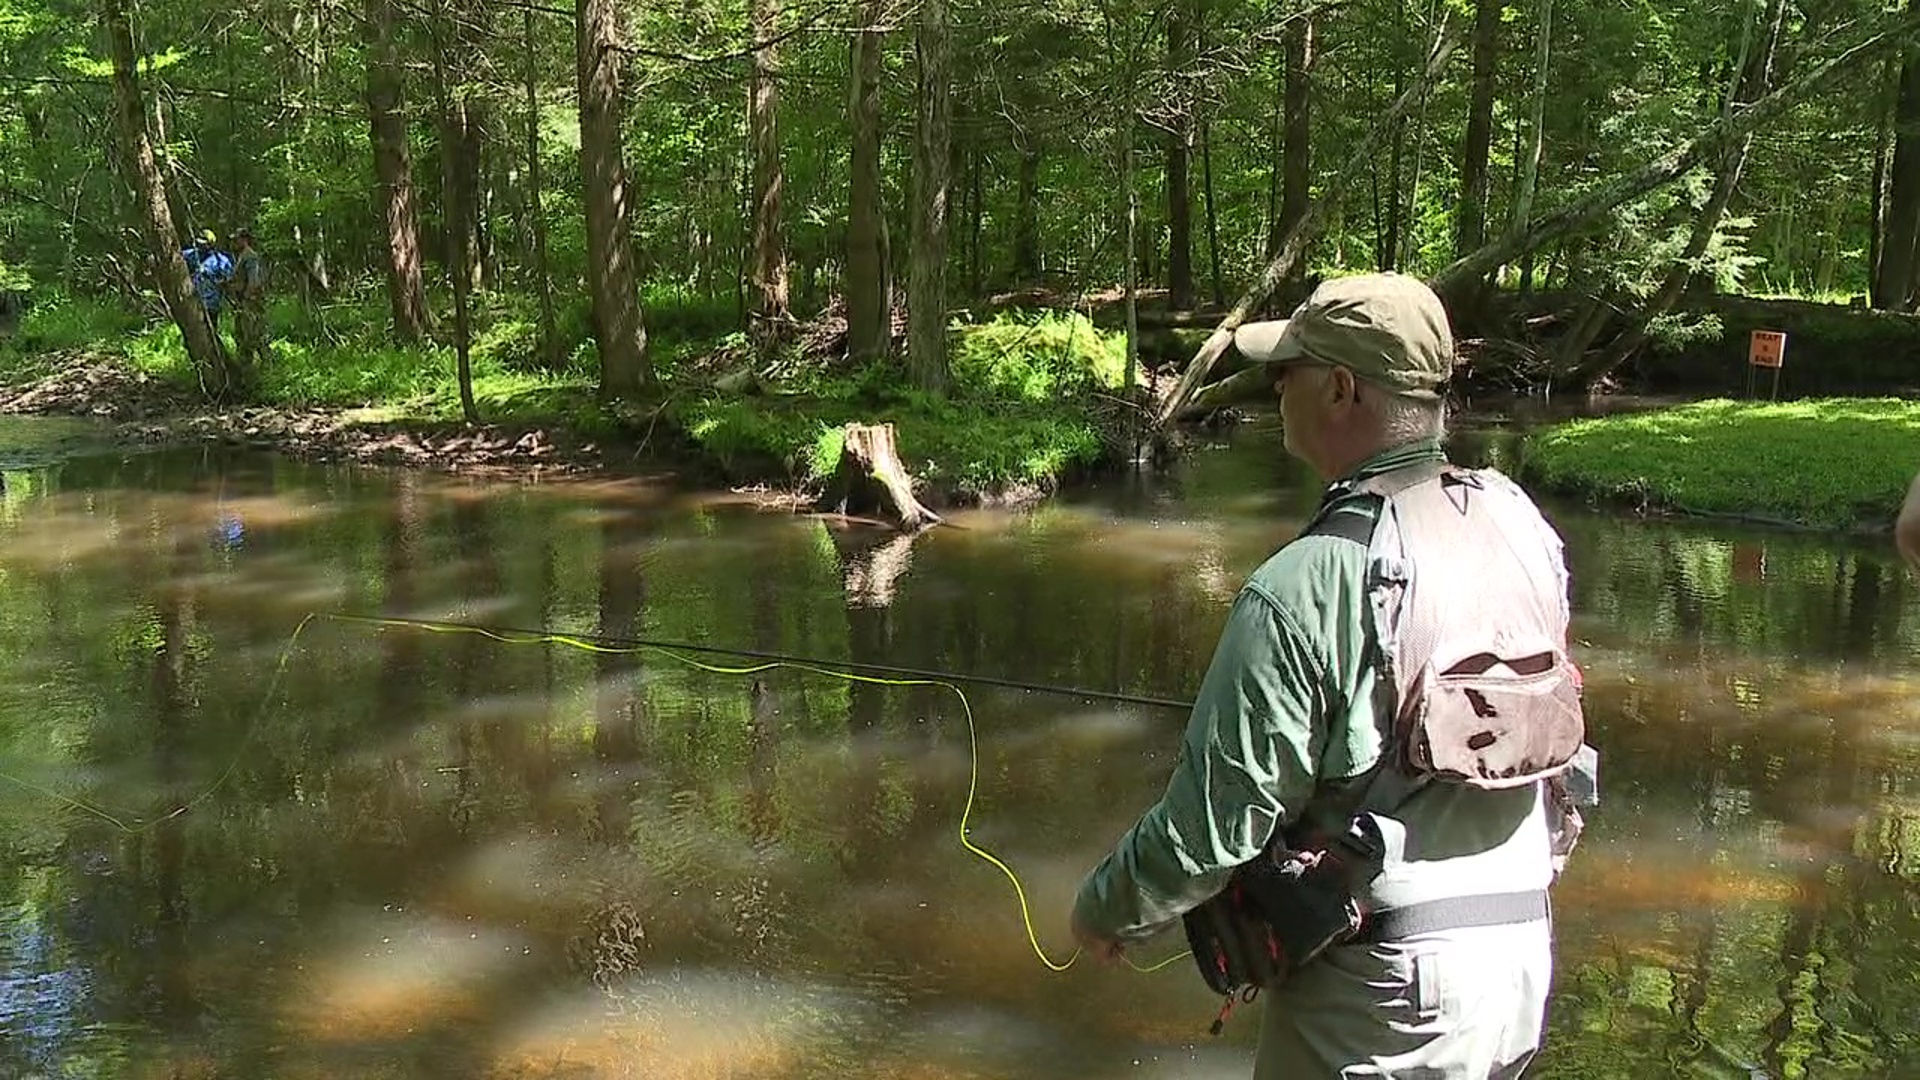 Newswatch 16's Melissa Steininger explains how a day of fishing in Wyoming County means so much to a group of veterans.